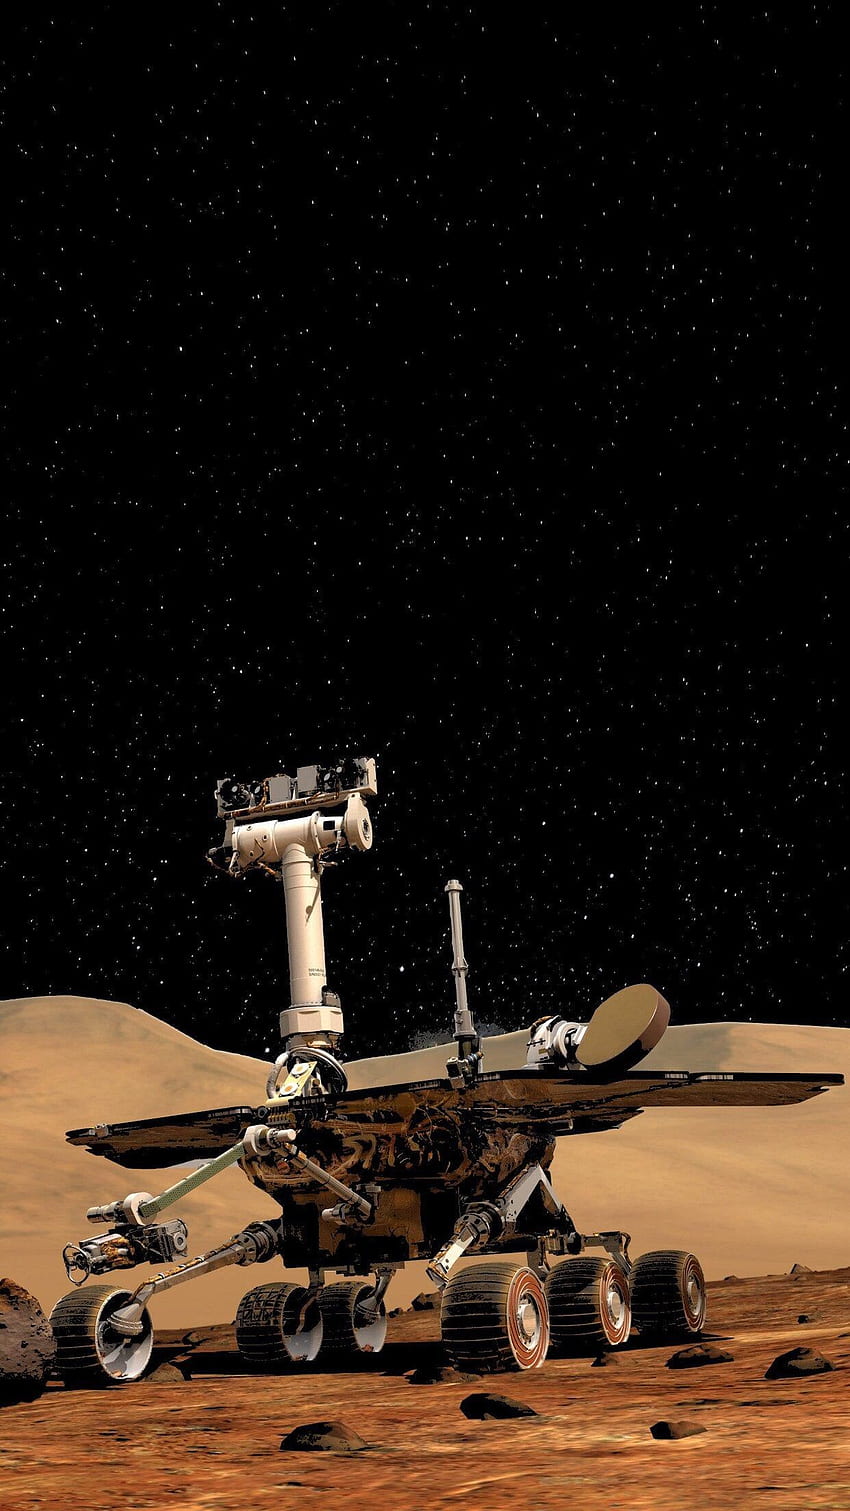 I made an Oledified Opportunity Mars Rover phone, Curiosity Rover HD phone wallpaper